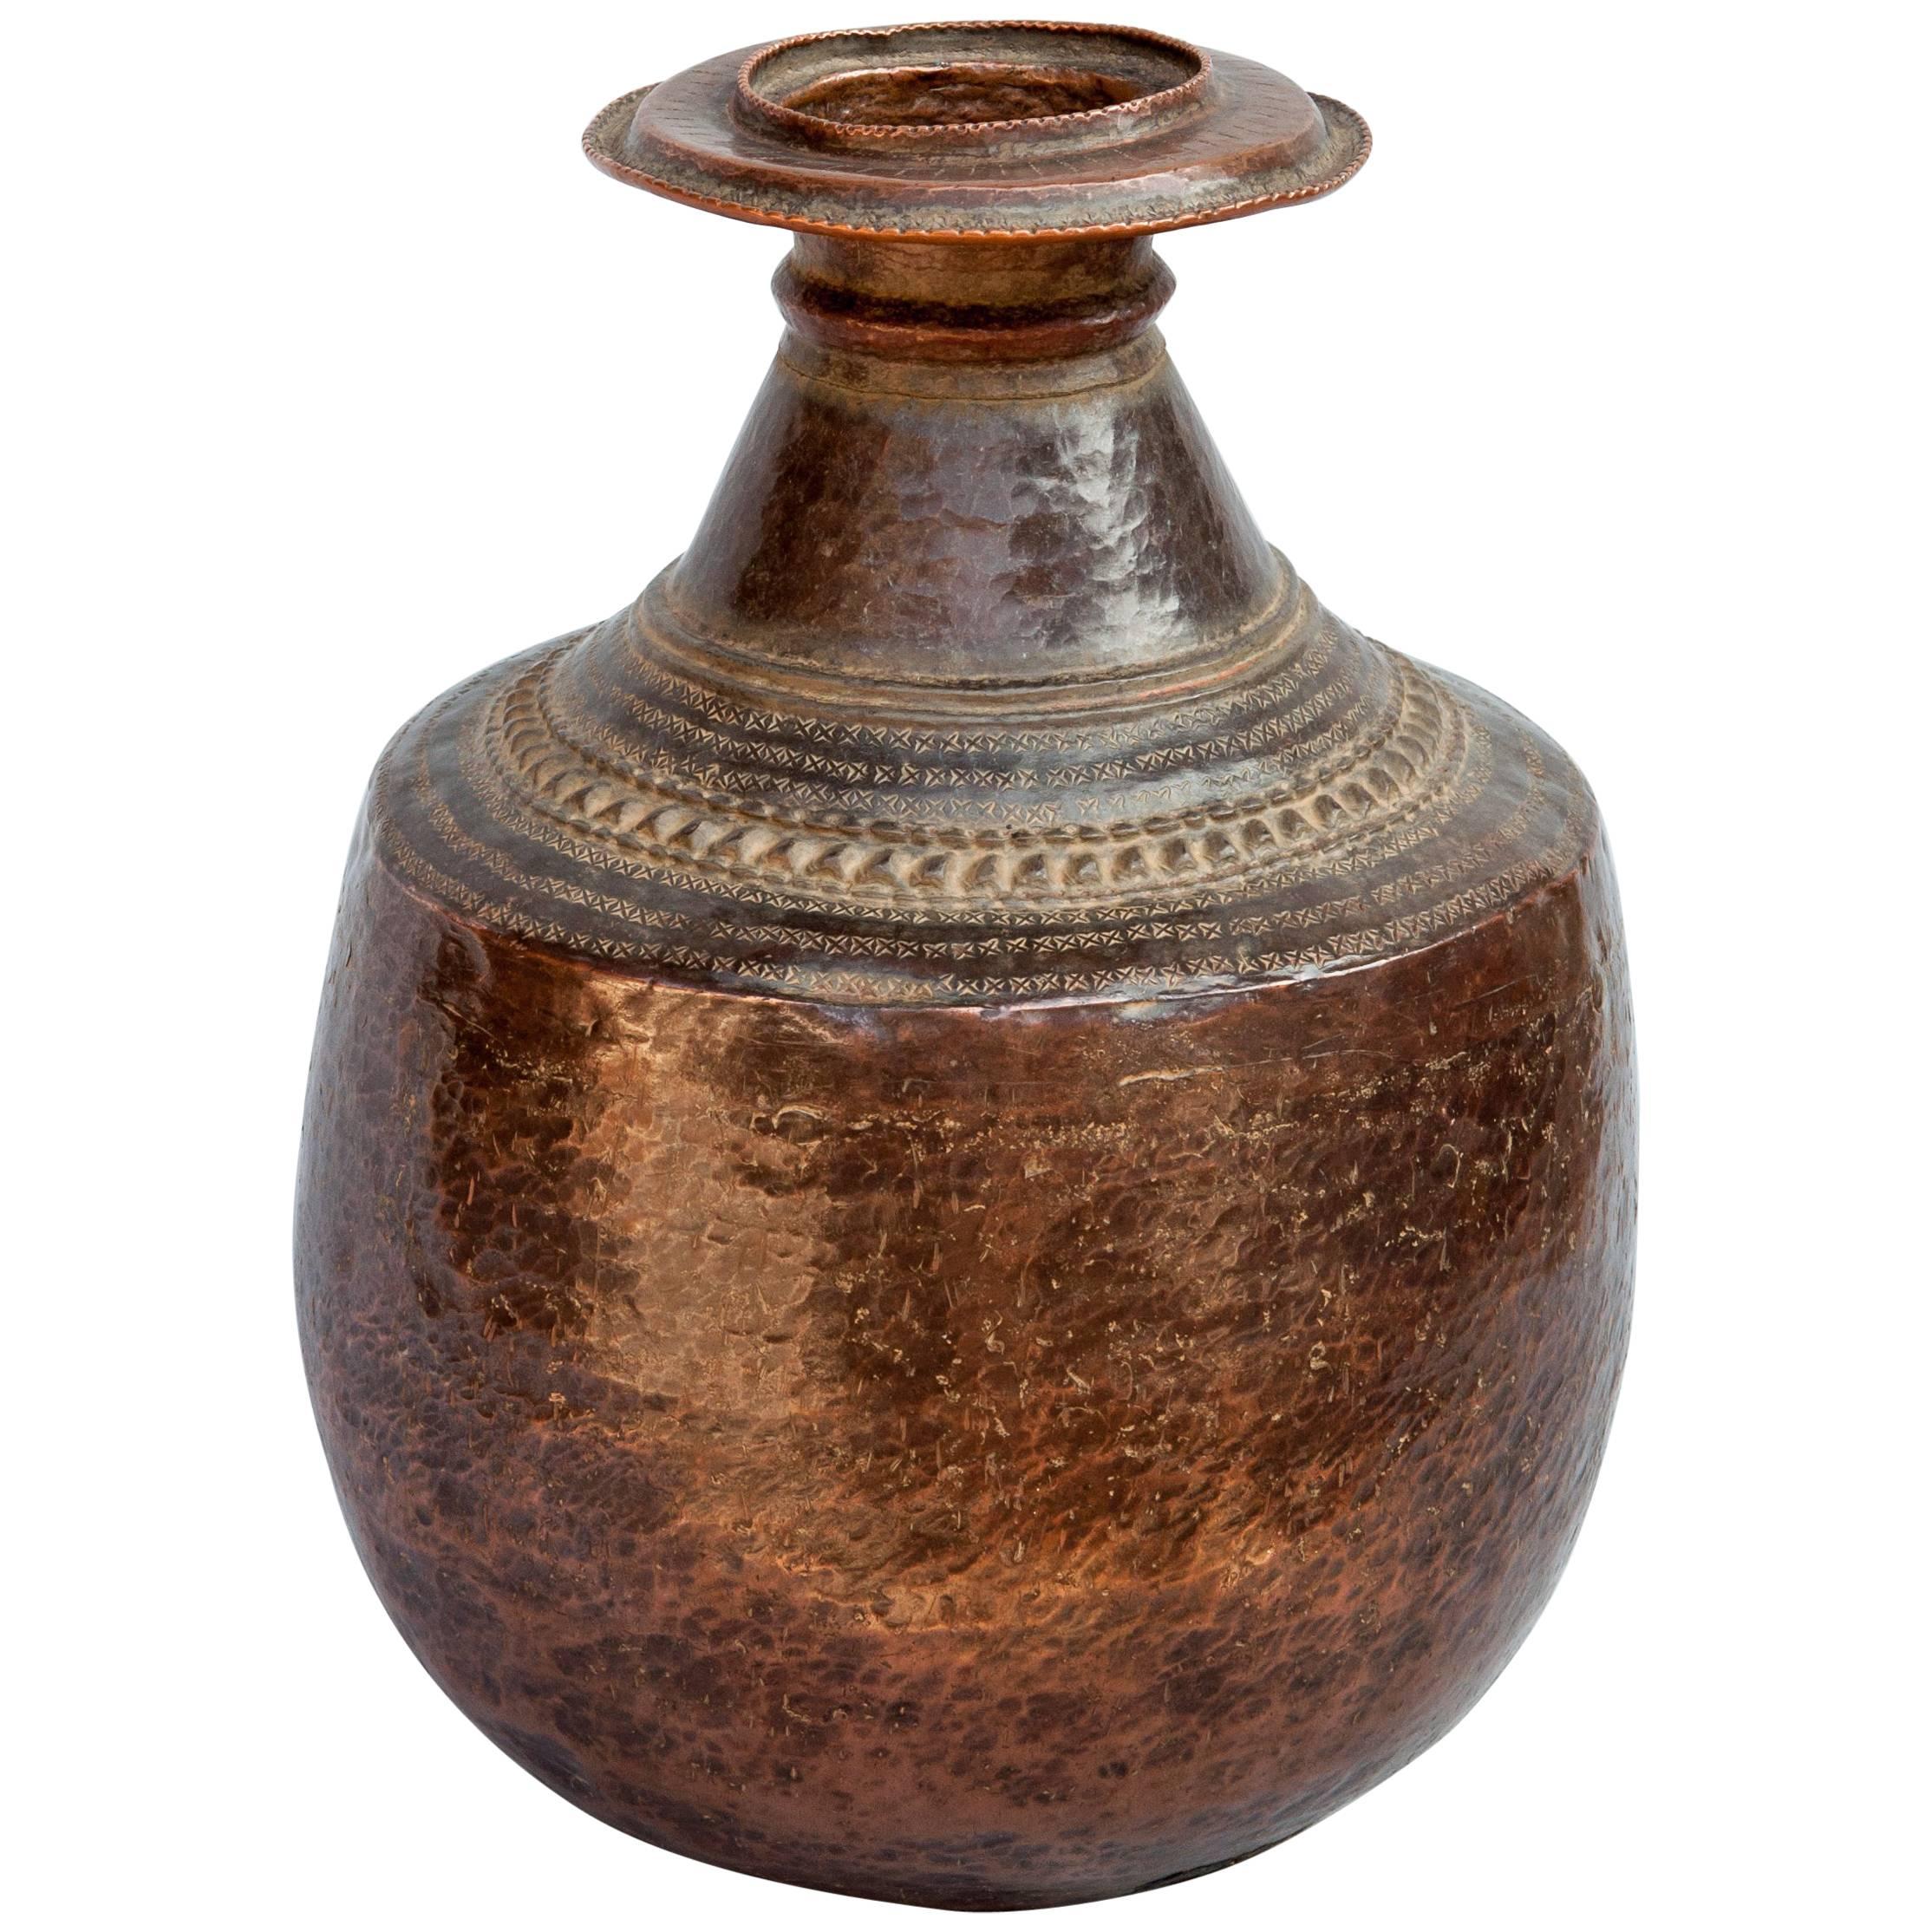 Vintage Copper Water Pot from Nepal, Mid-20th Century